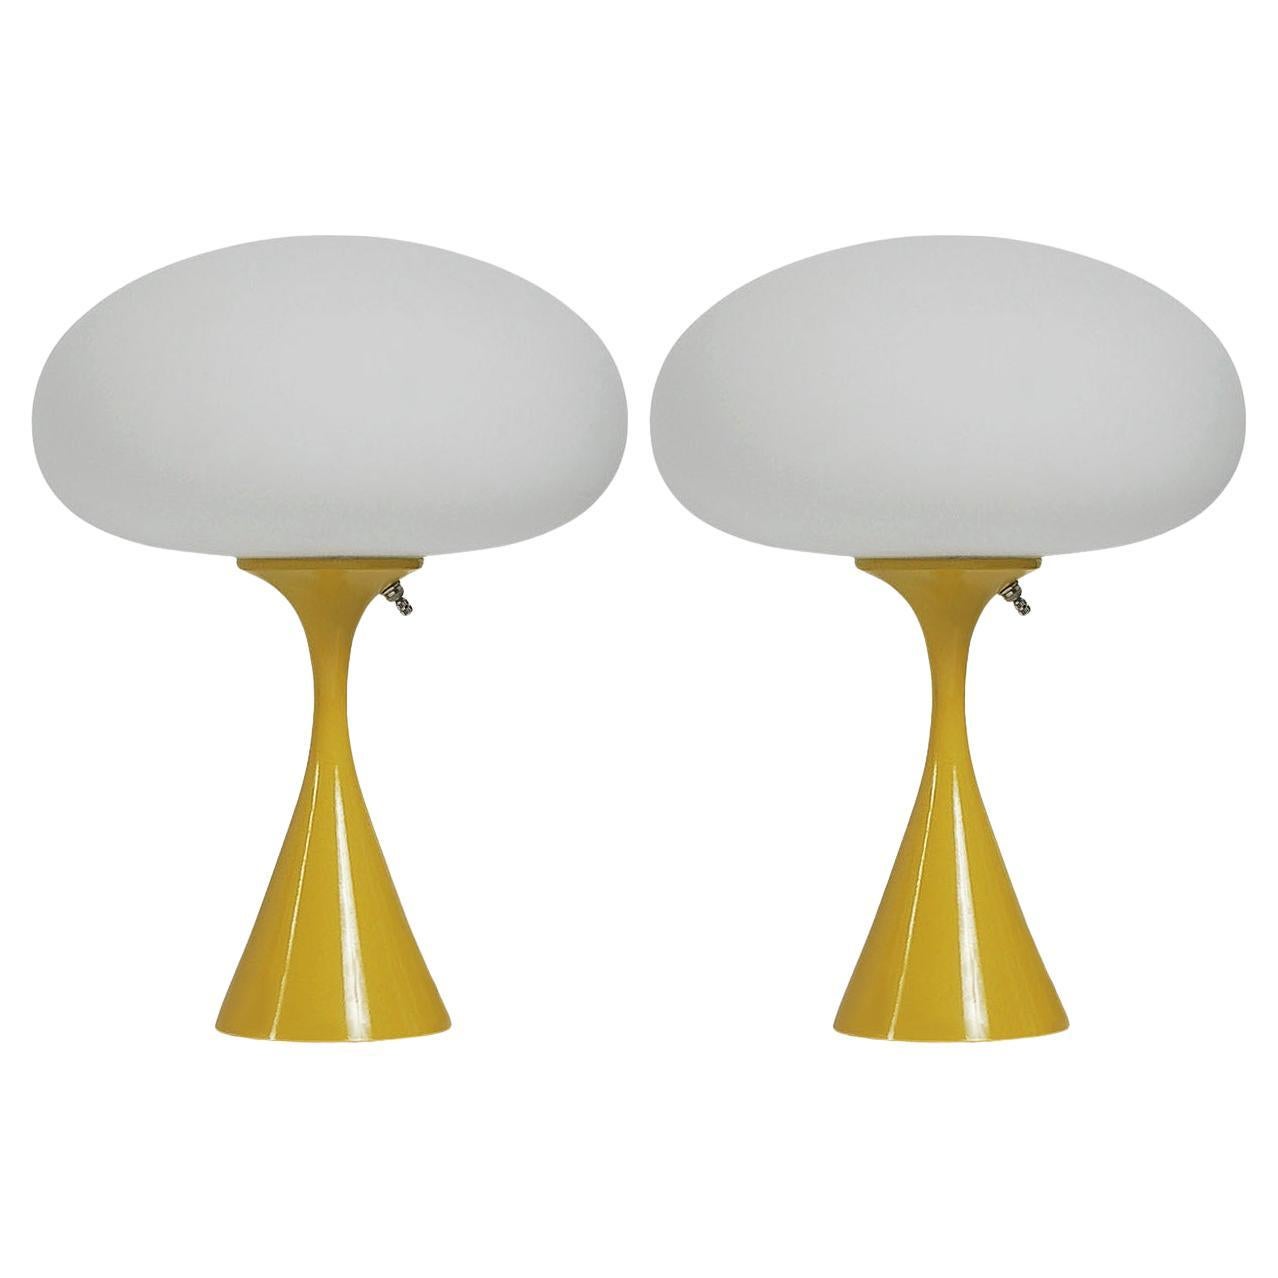 Pair of Mid-Century Modern Table Lamps by Designline in Yellow & White Glass